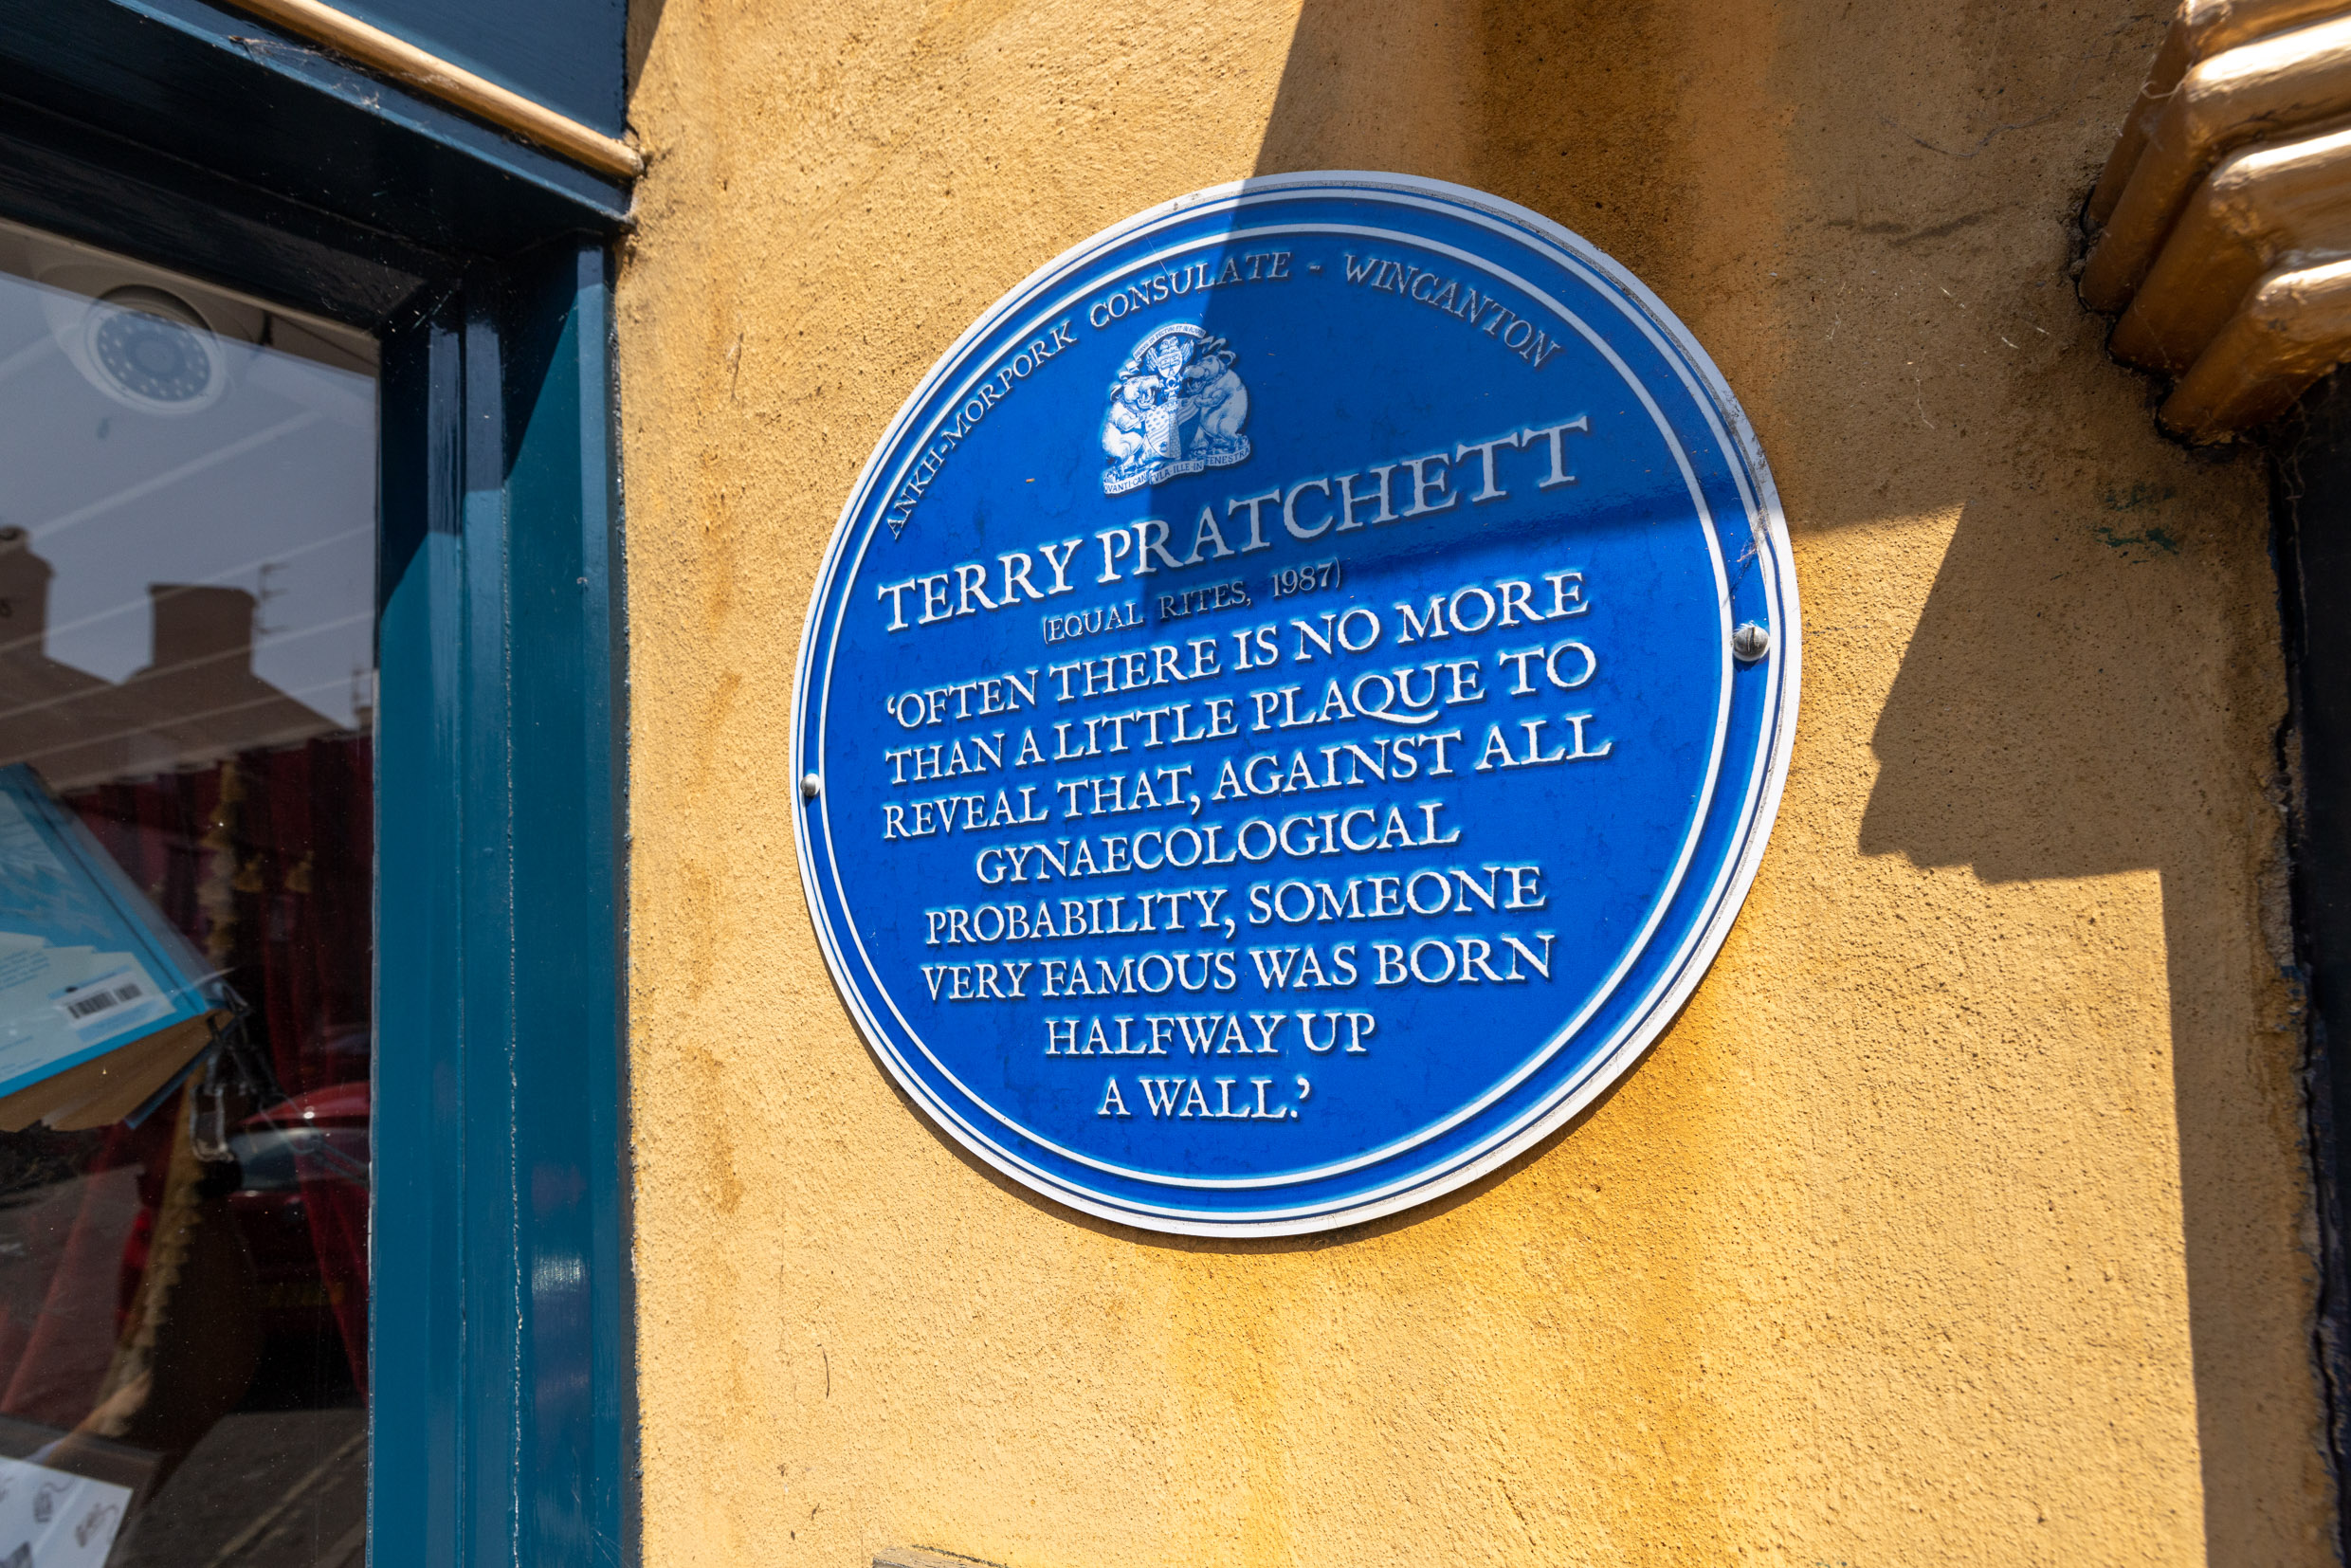 The Discworld Emporium, dedicated to all things Terry Pratchett, was in Wincanton High Street